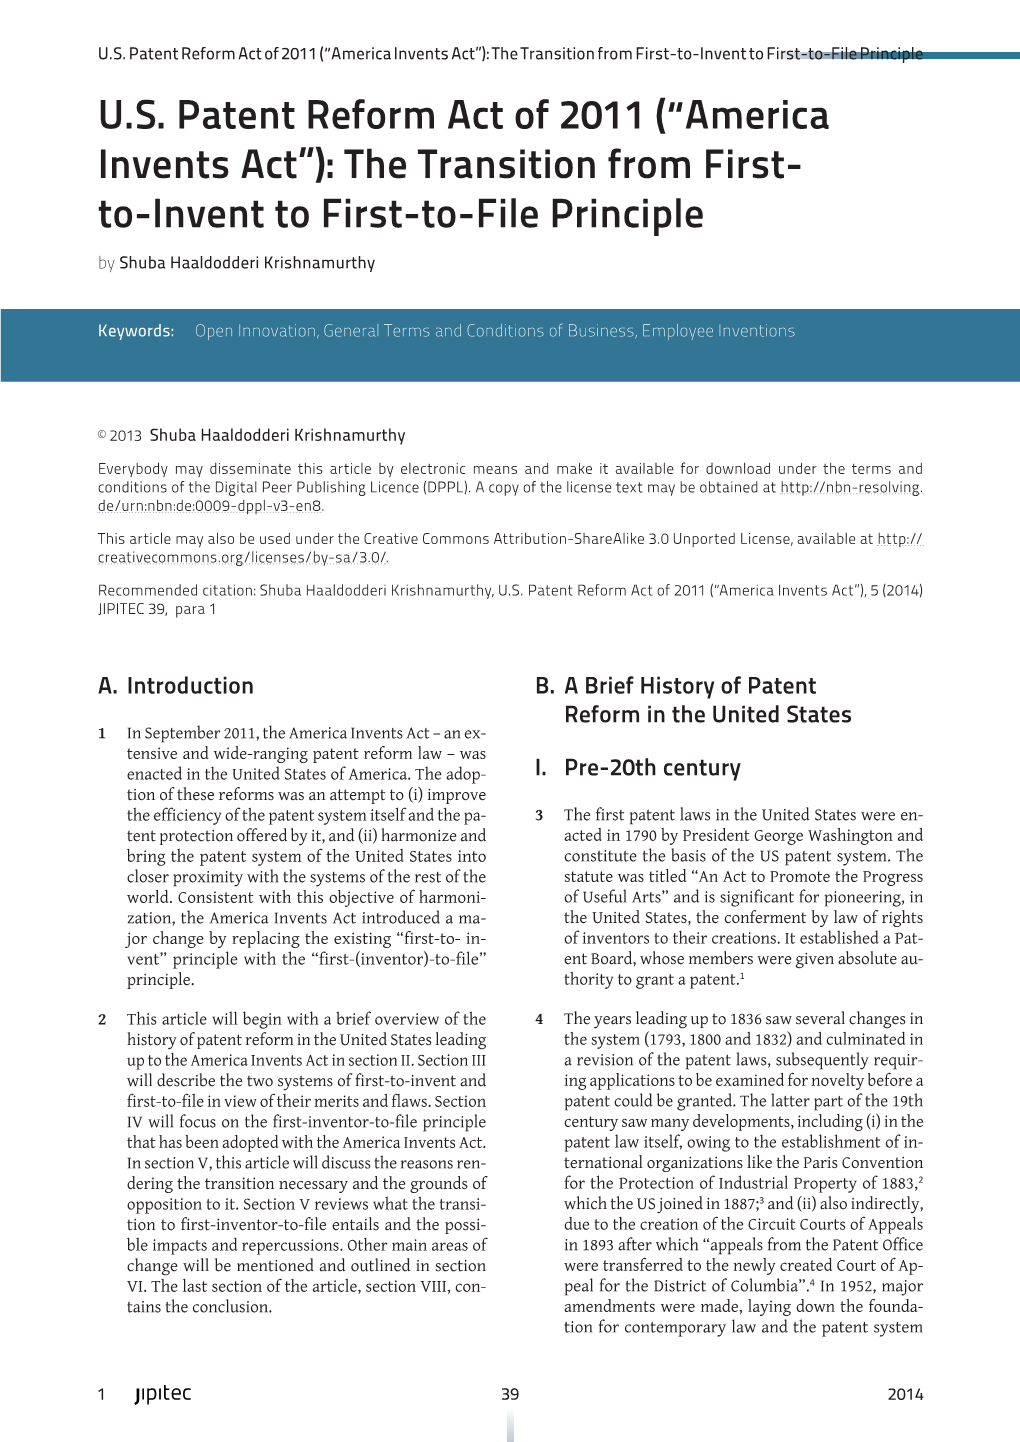 U.S. Patent Reform Act of 2011 (“America Invents Act”): the Transition from First- To-Invent to First-To-File Principle by Shuba Haaldodderi Krishnamurthy